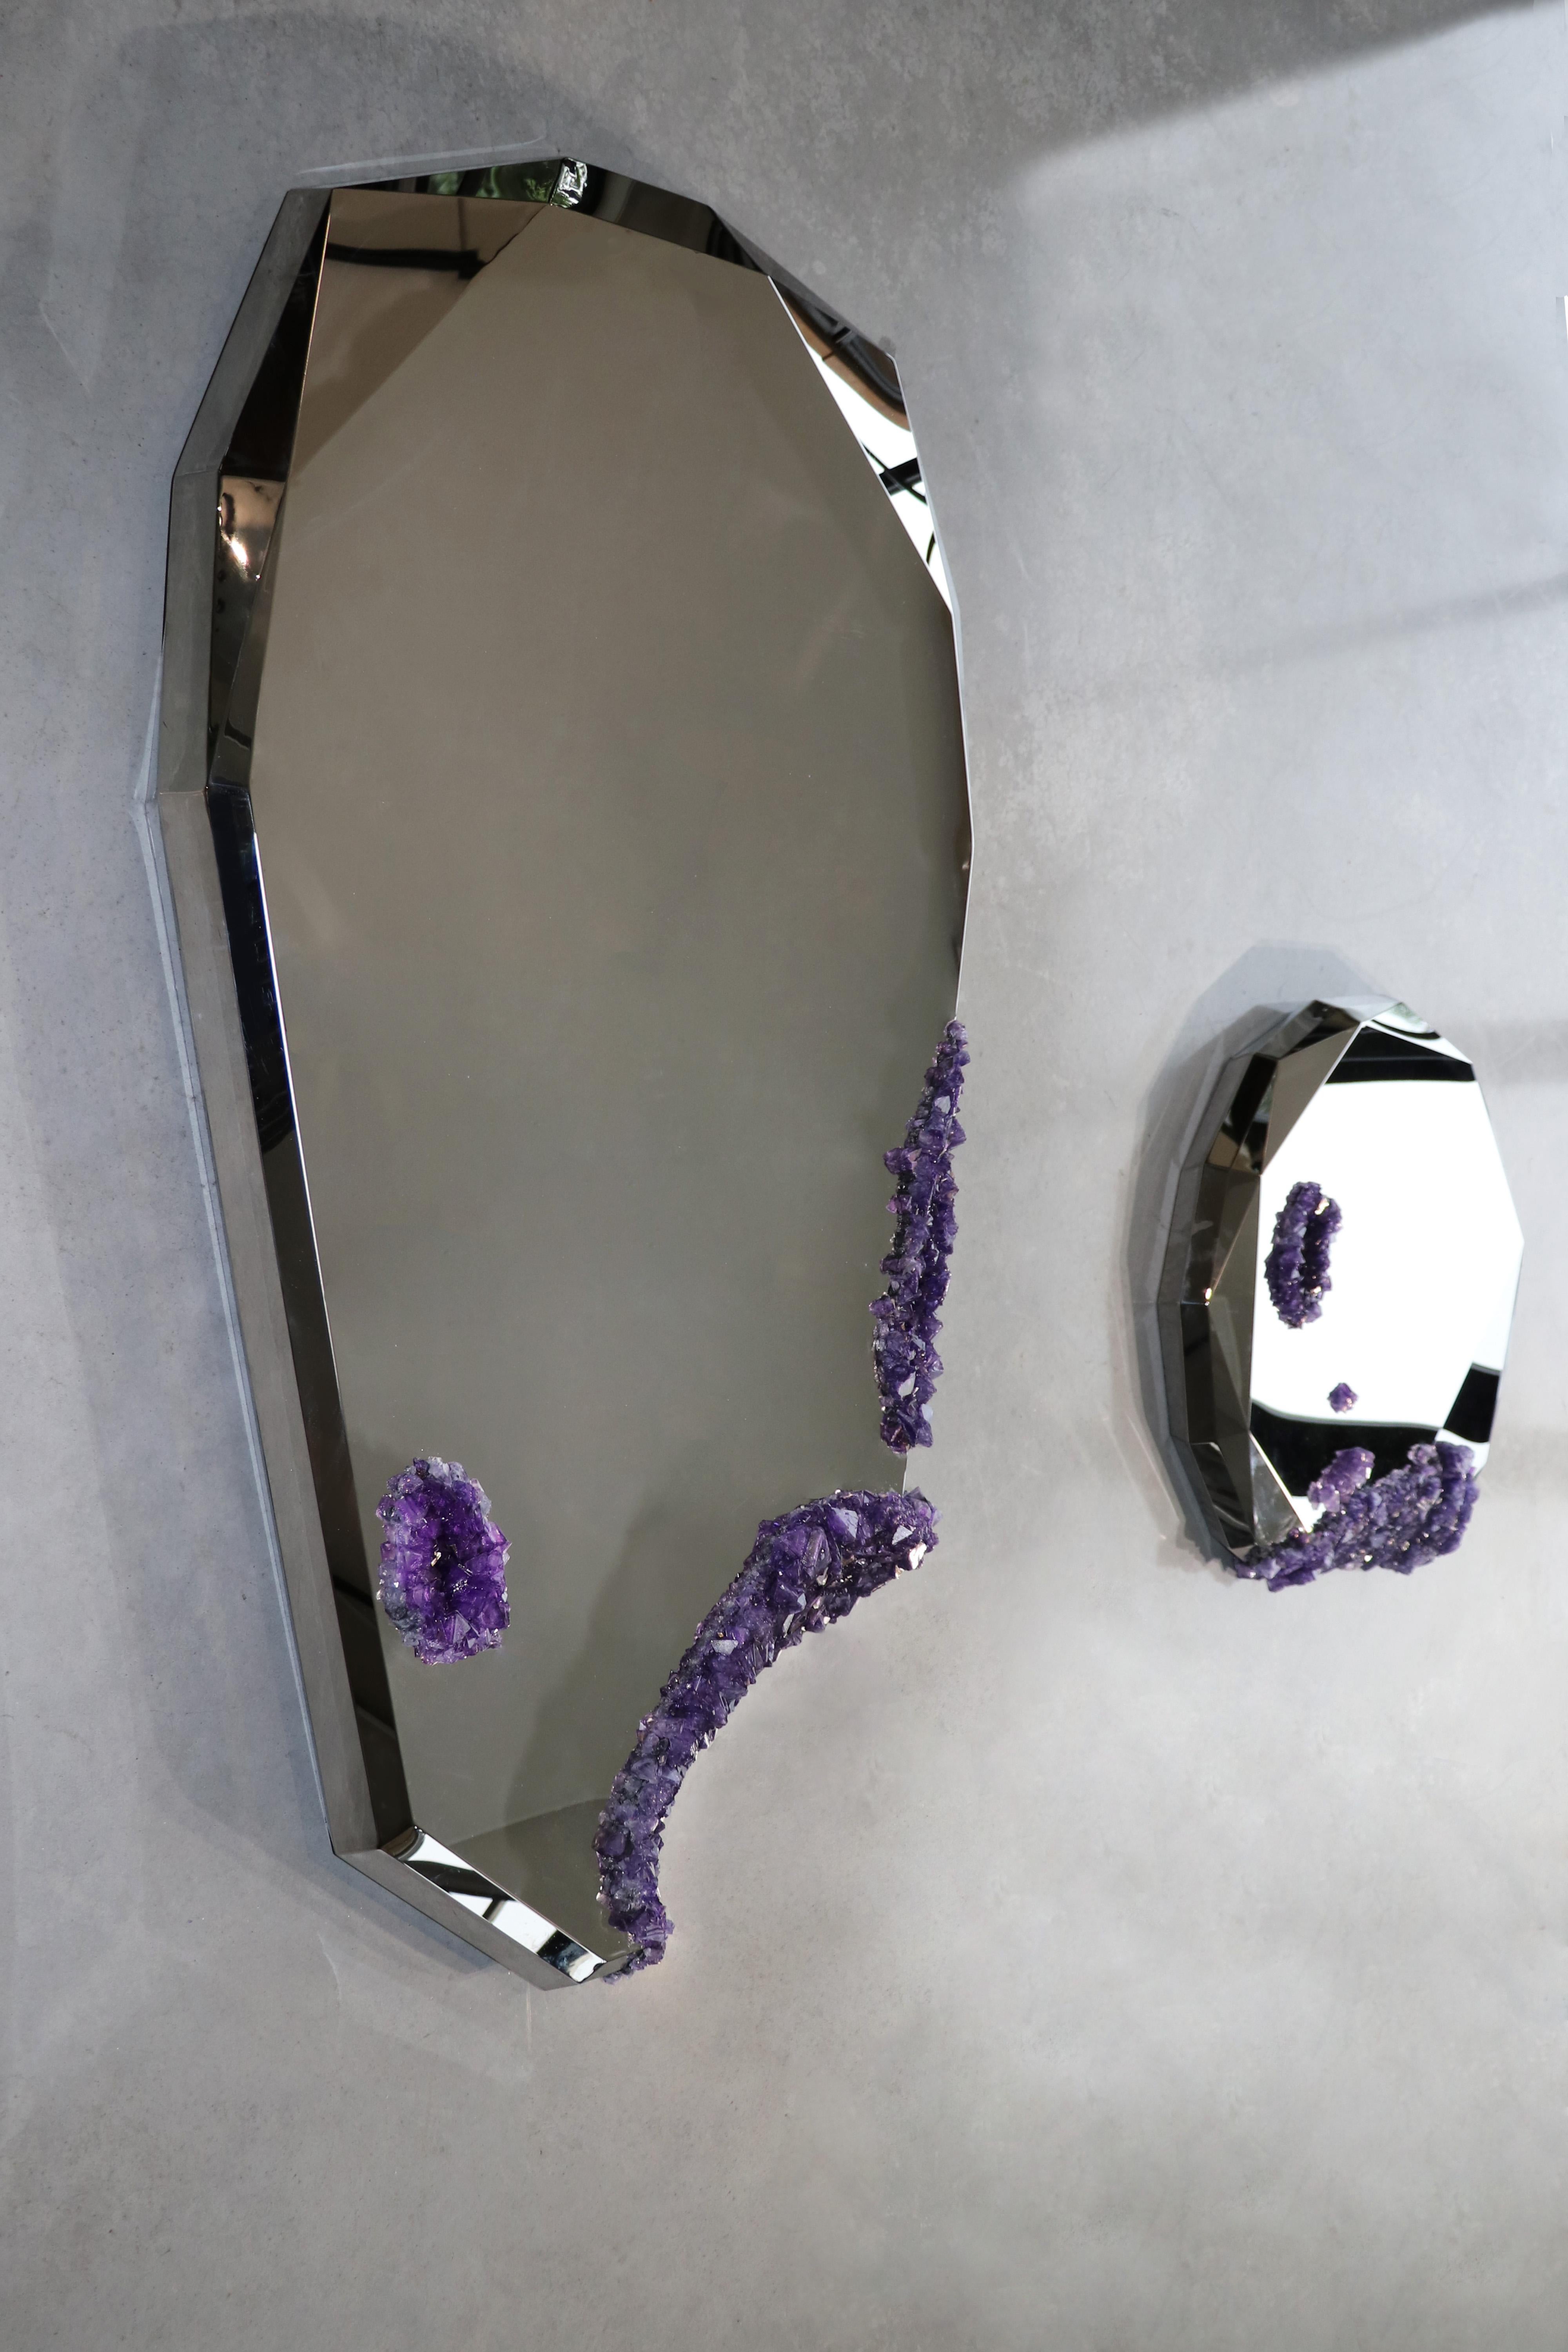 Once upon a time Harmonia mirror by Mark Sturkenboom
Edition of 10
Dimensions: 151 × 86 × 9 cm
Material: Stainless steel, mineral crystals

Our environment is cluttered with the artifacts of human habitation, leading one to wonder, “How would